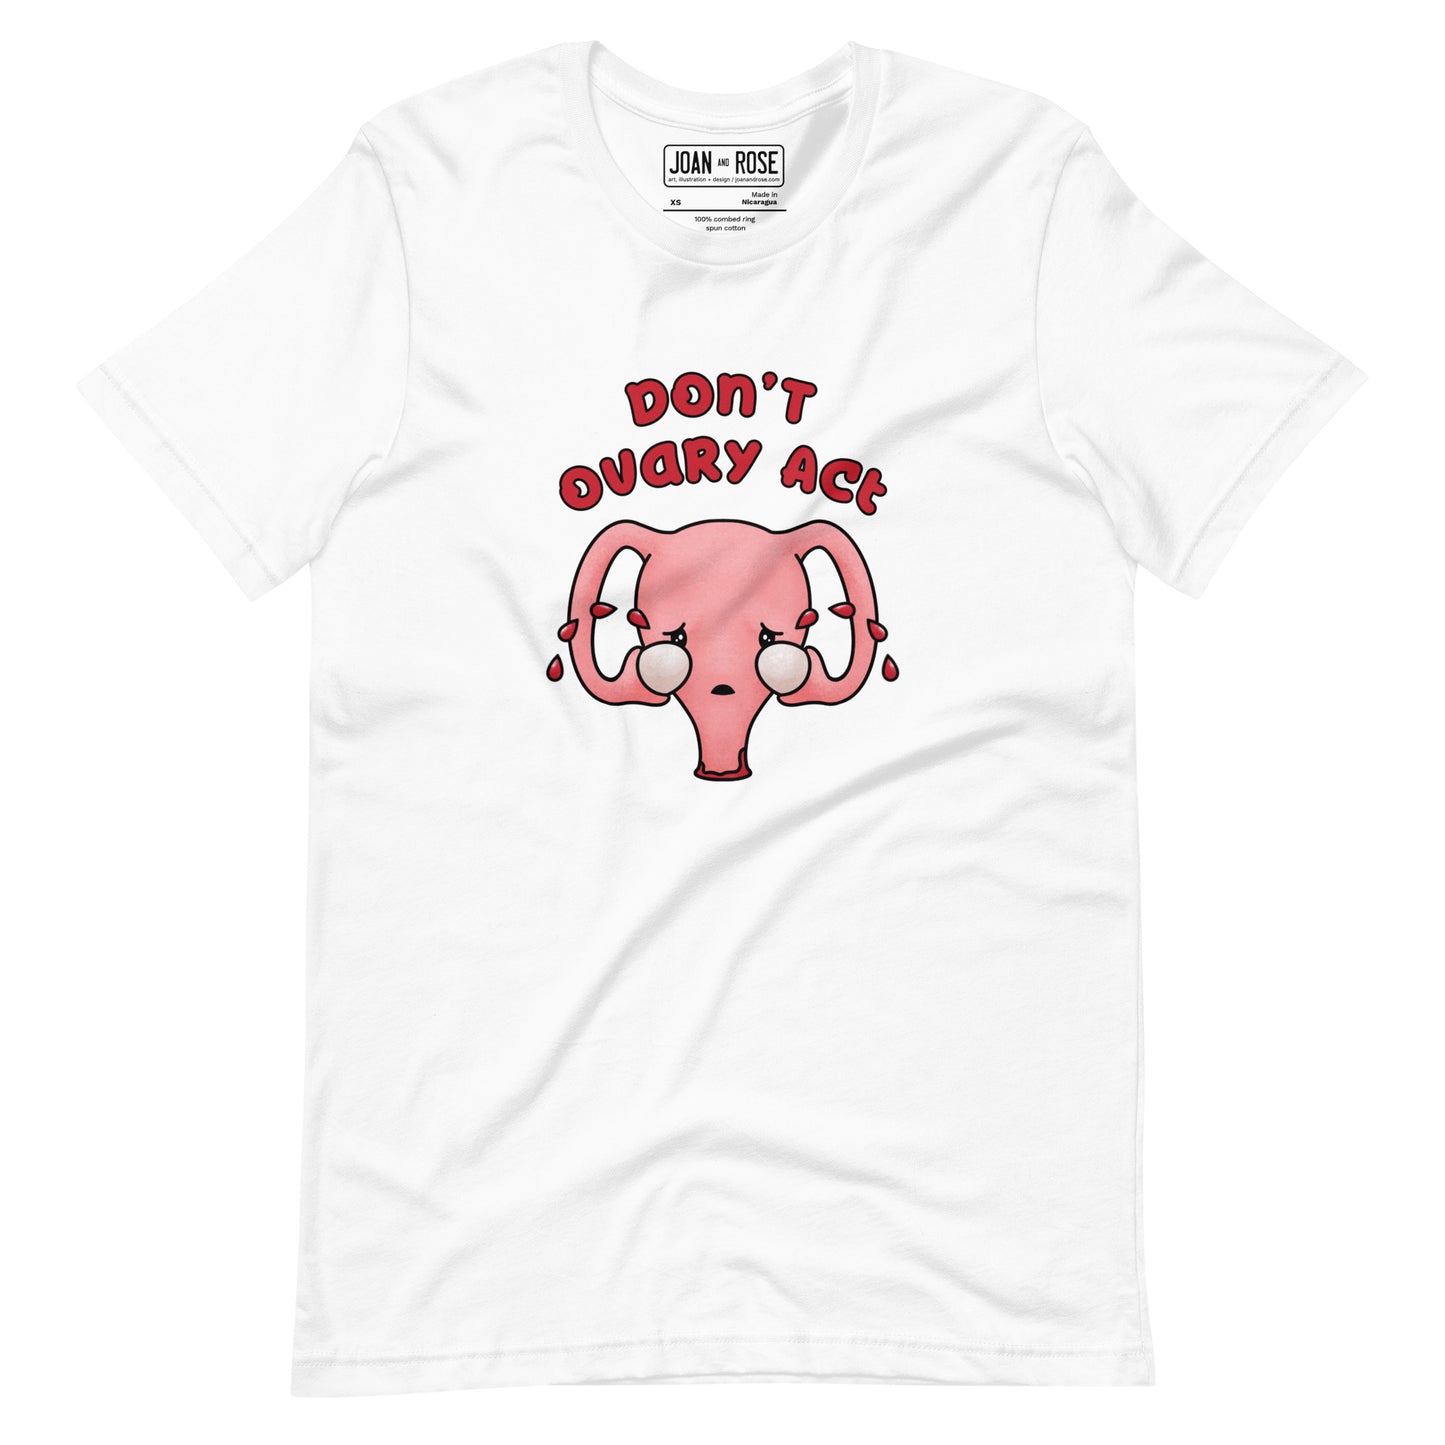 White version of Don't Ovary Act t-shirt